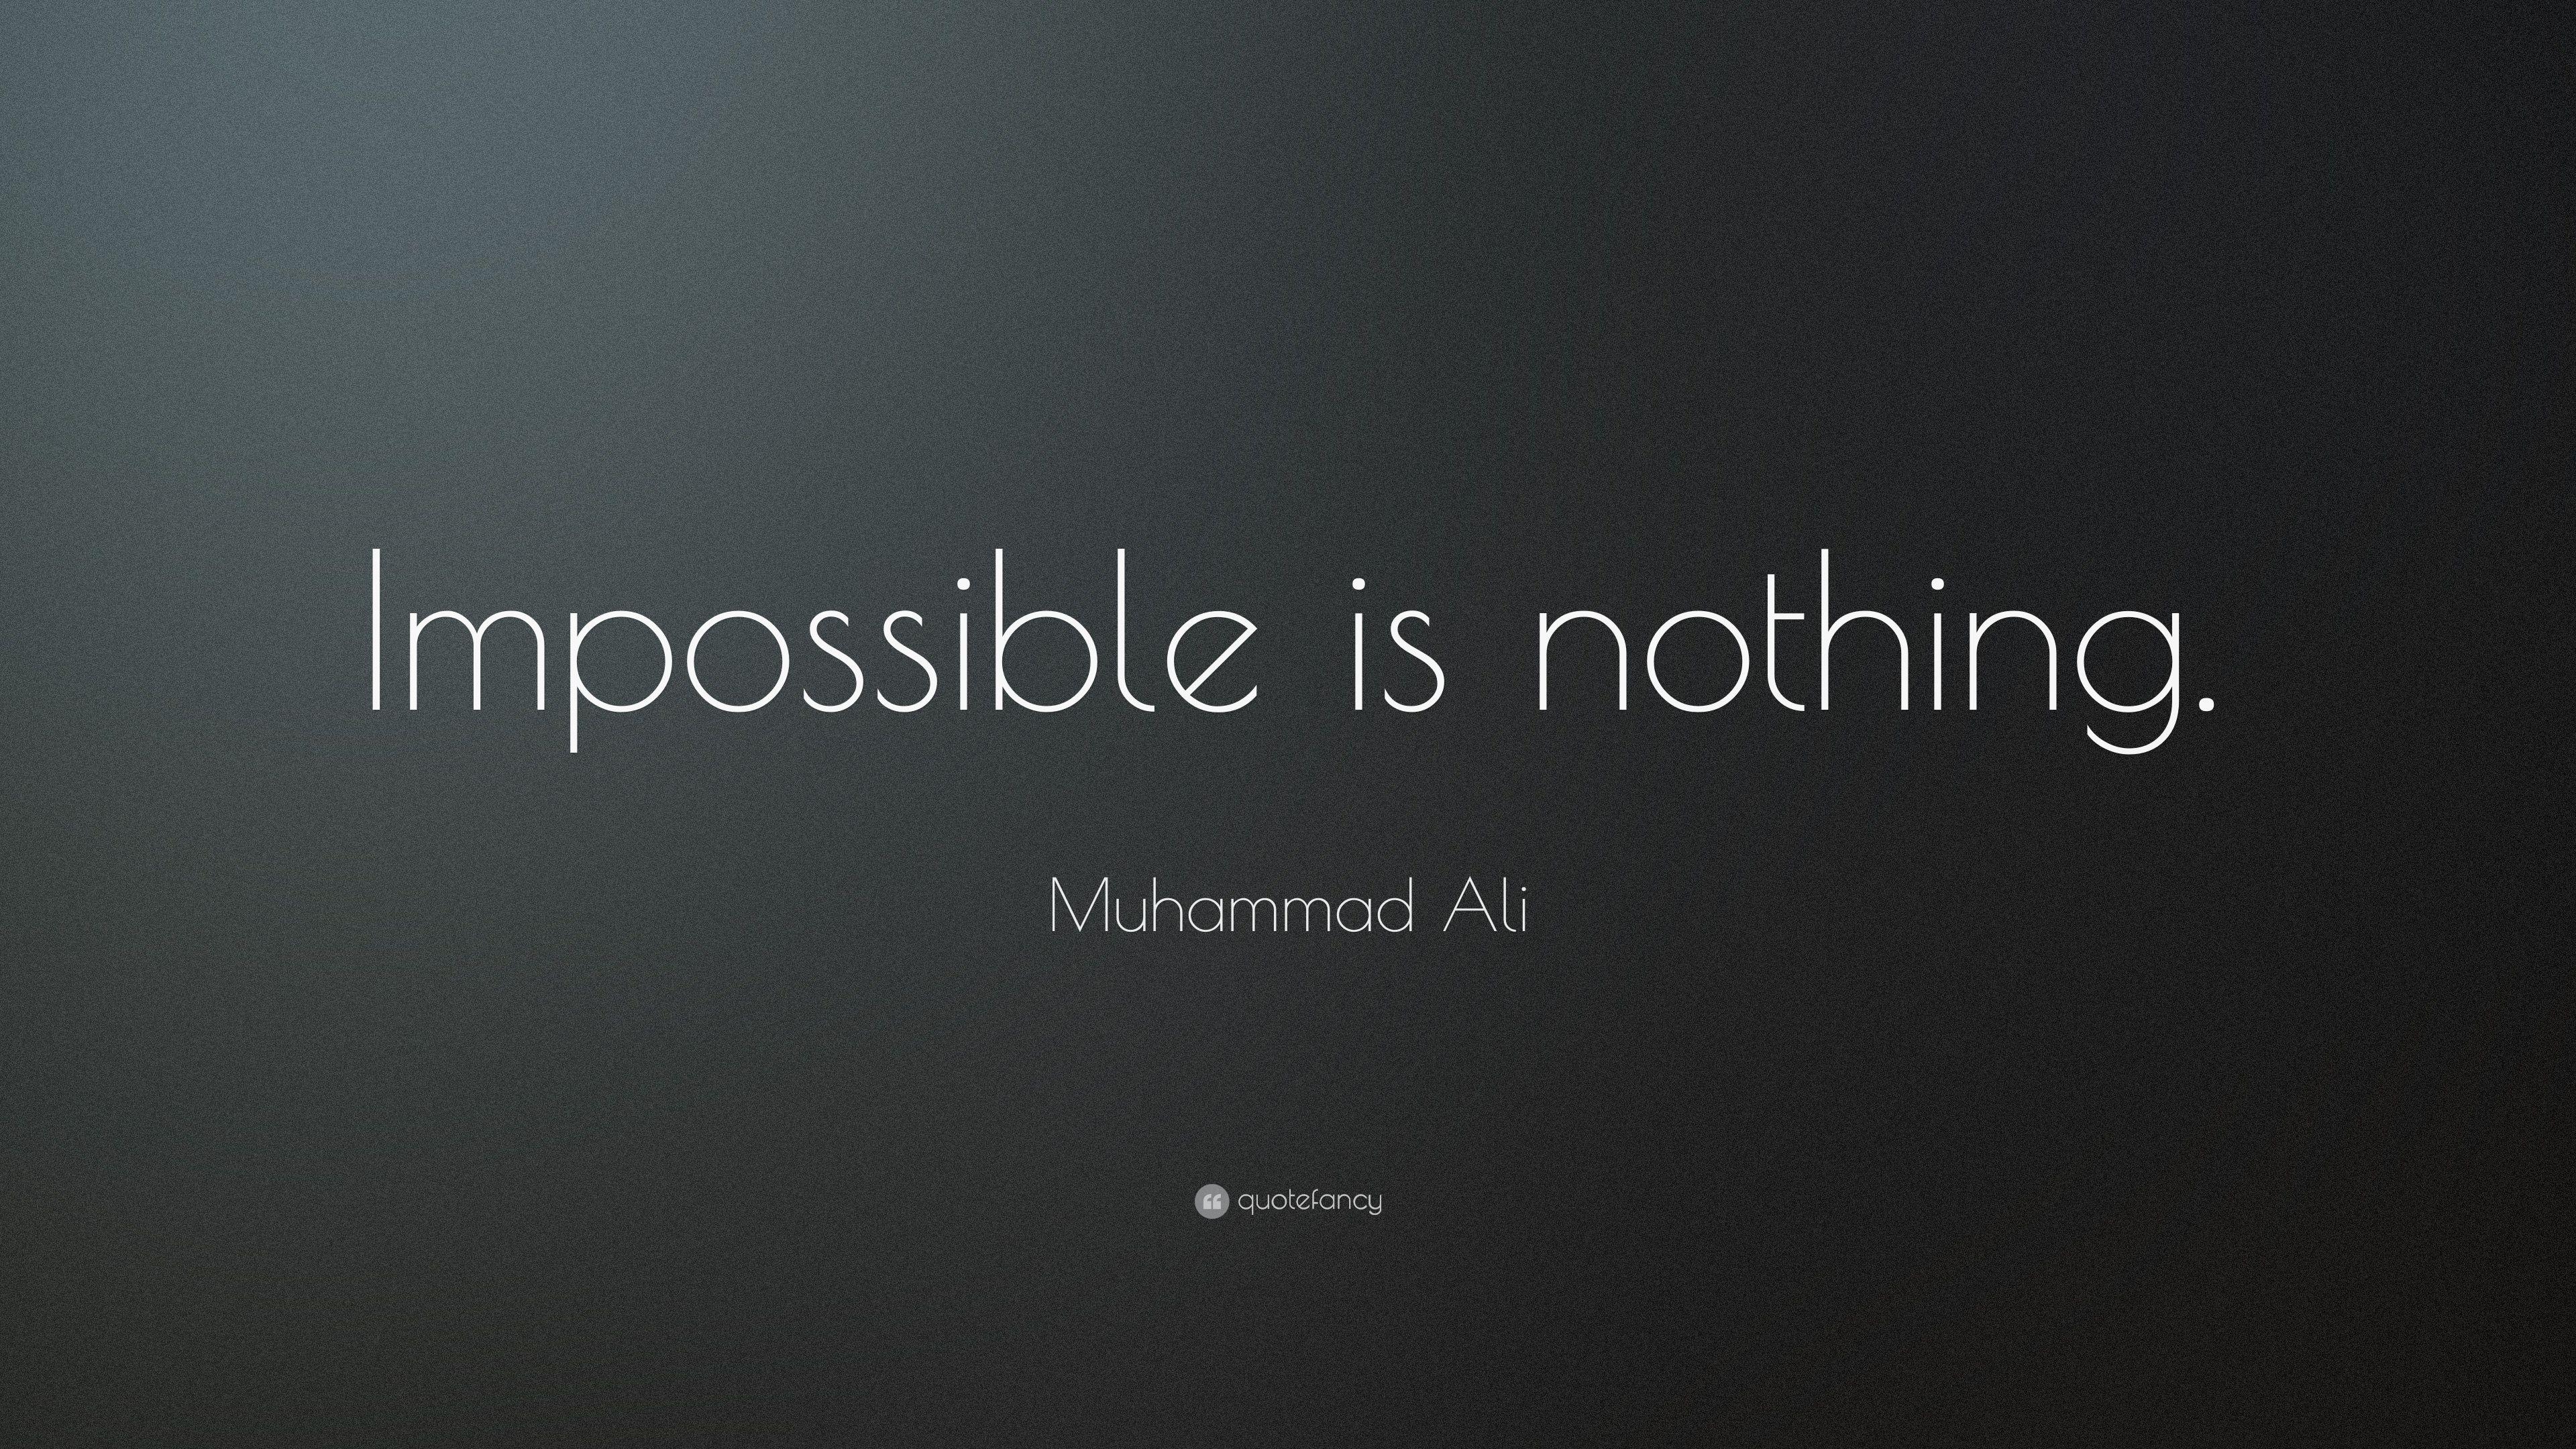 Muhammad Ali Quote: “Impossible is nothing.” 26 wallpaper